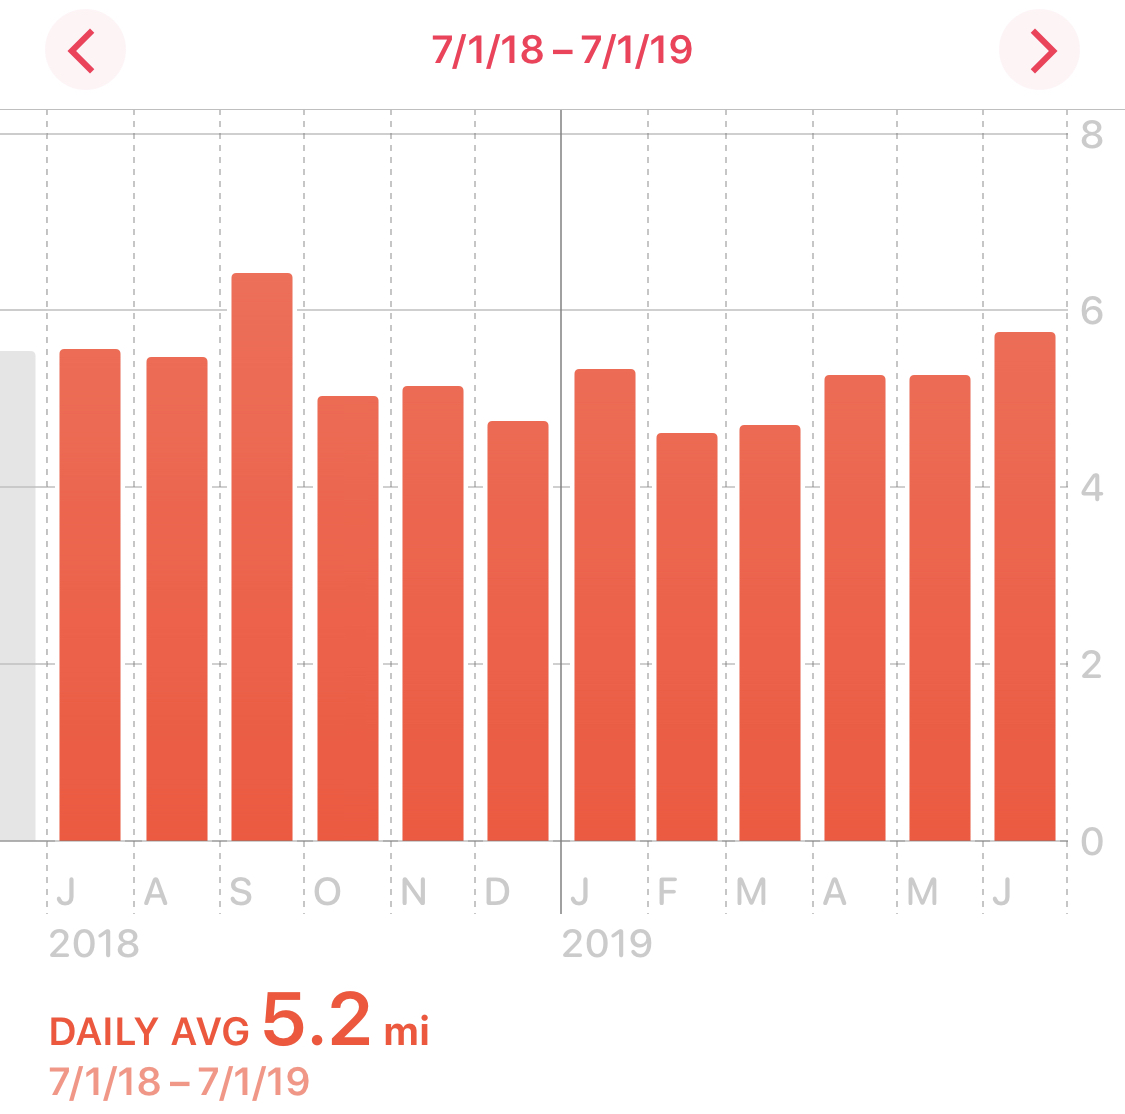 Graph showing my exercise based on distance walked or ran for the last year.